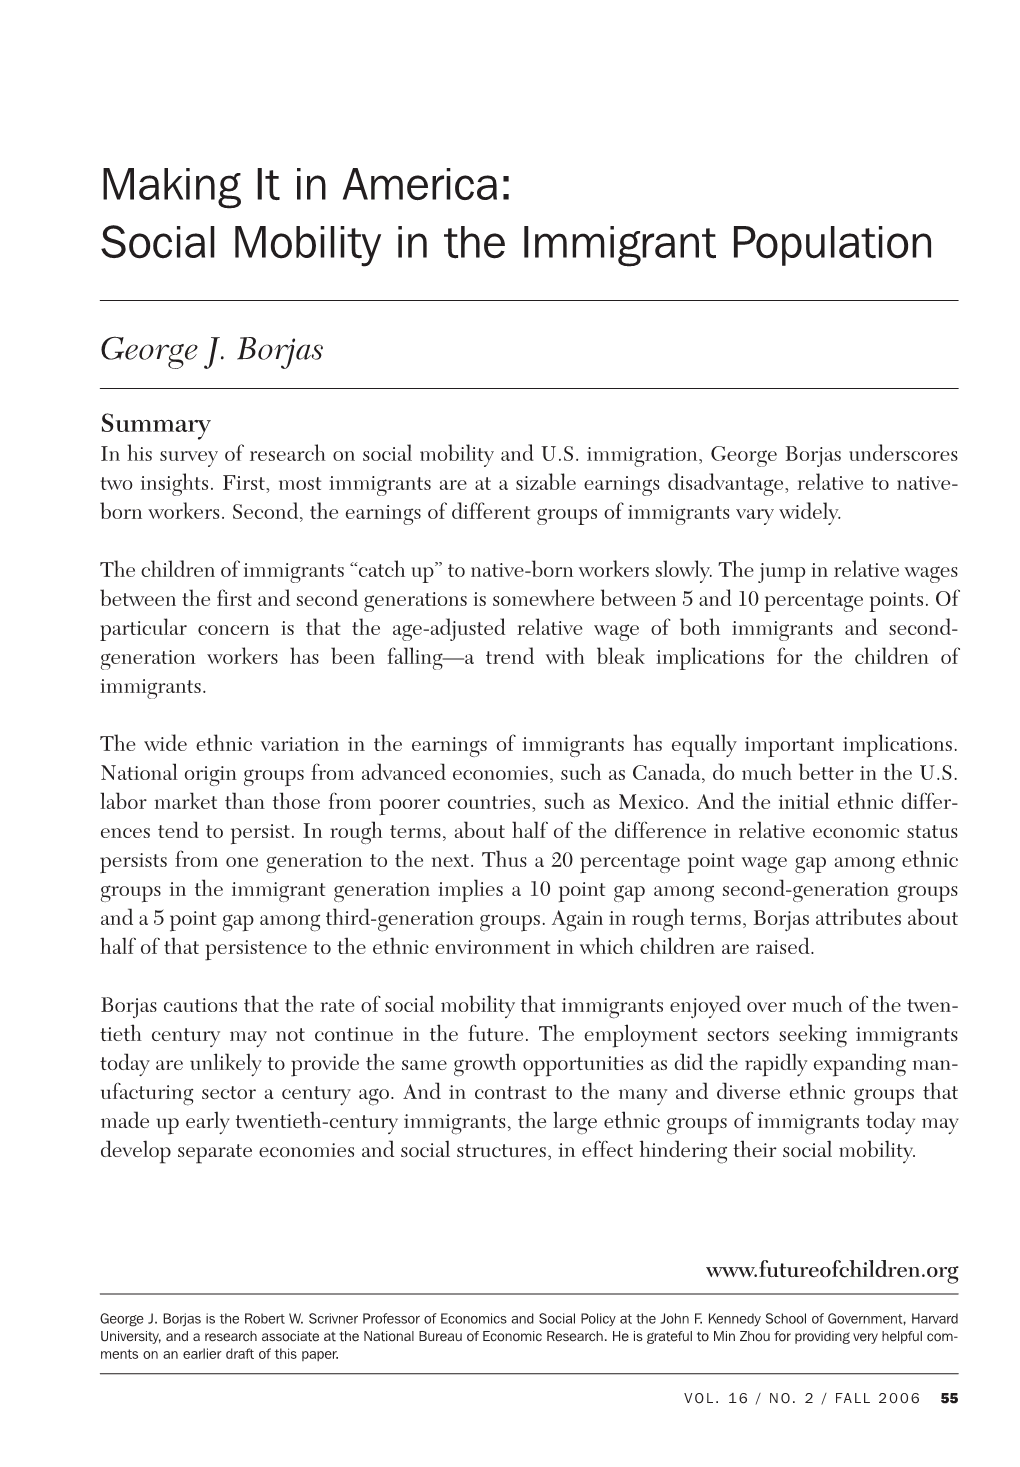 Social Mobility in the Immigrant Population